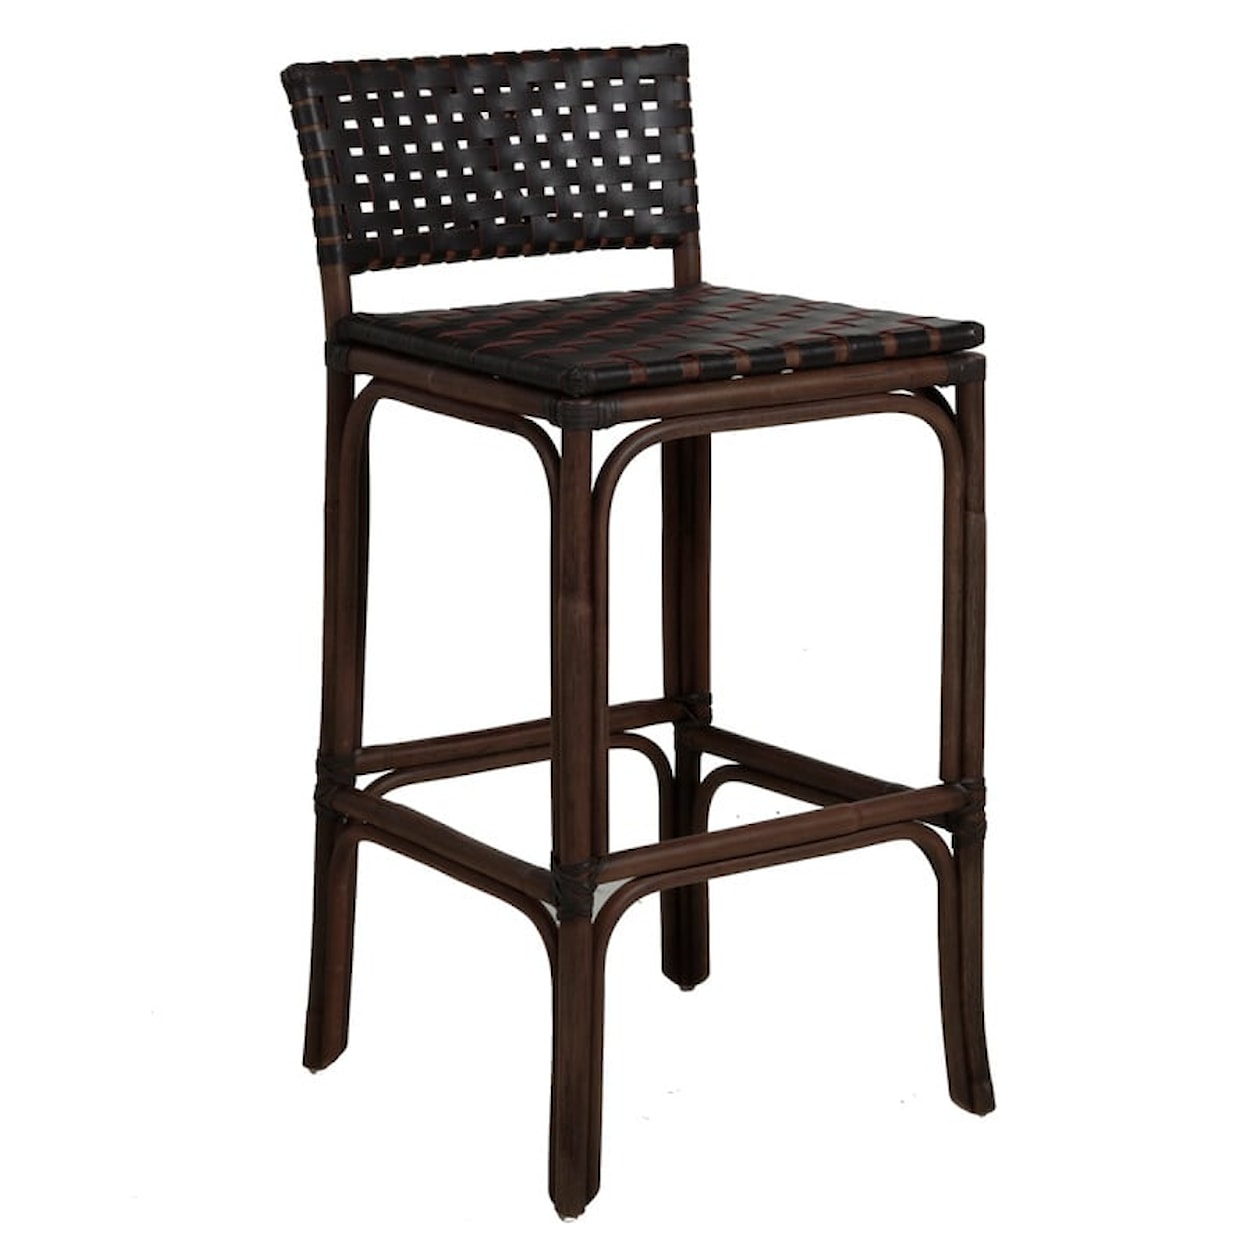 Gabby Stools DYLAN 24.25" COUNTER HEIGHT STOOL